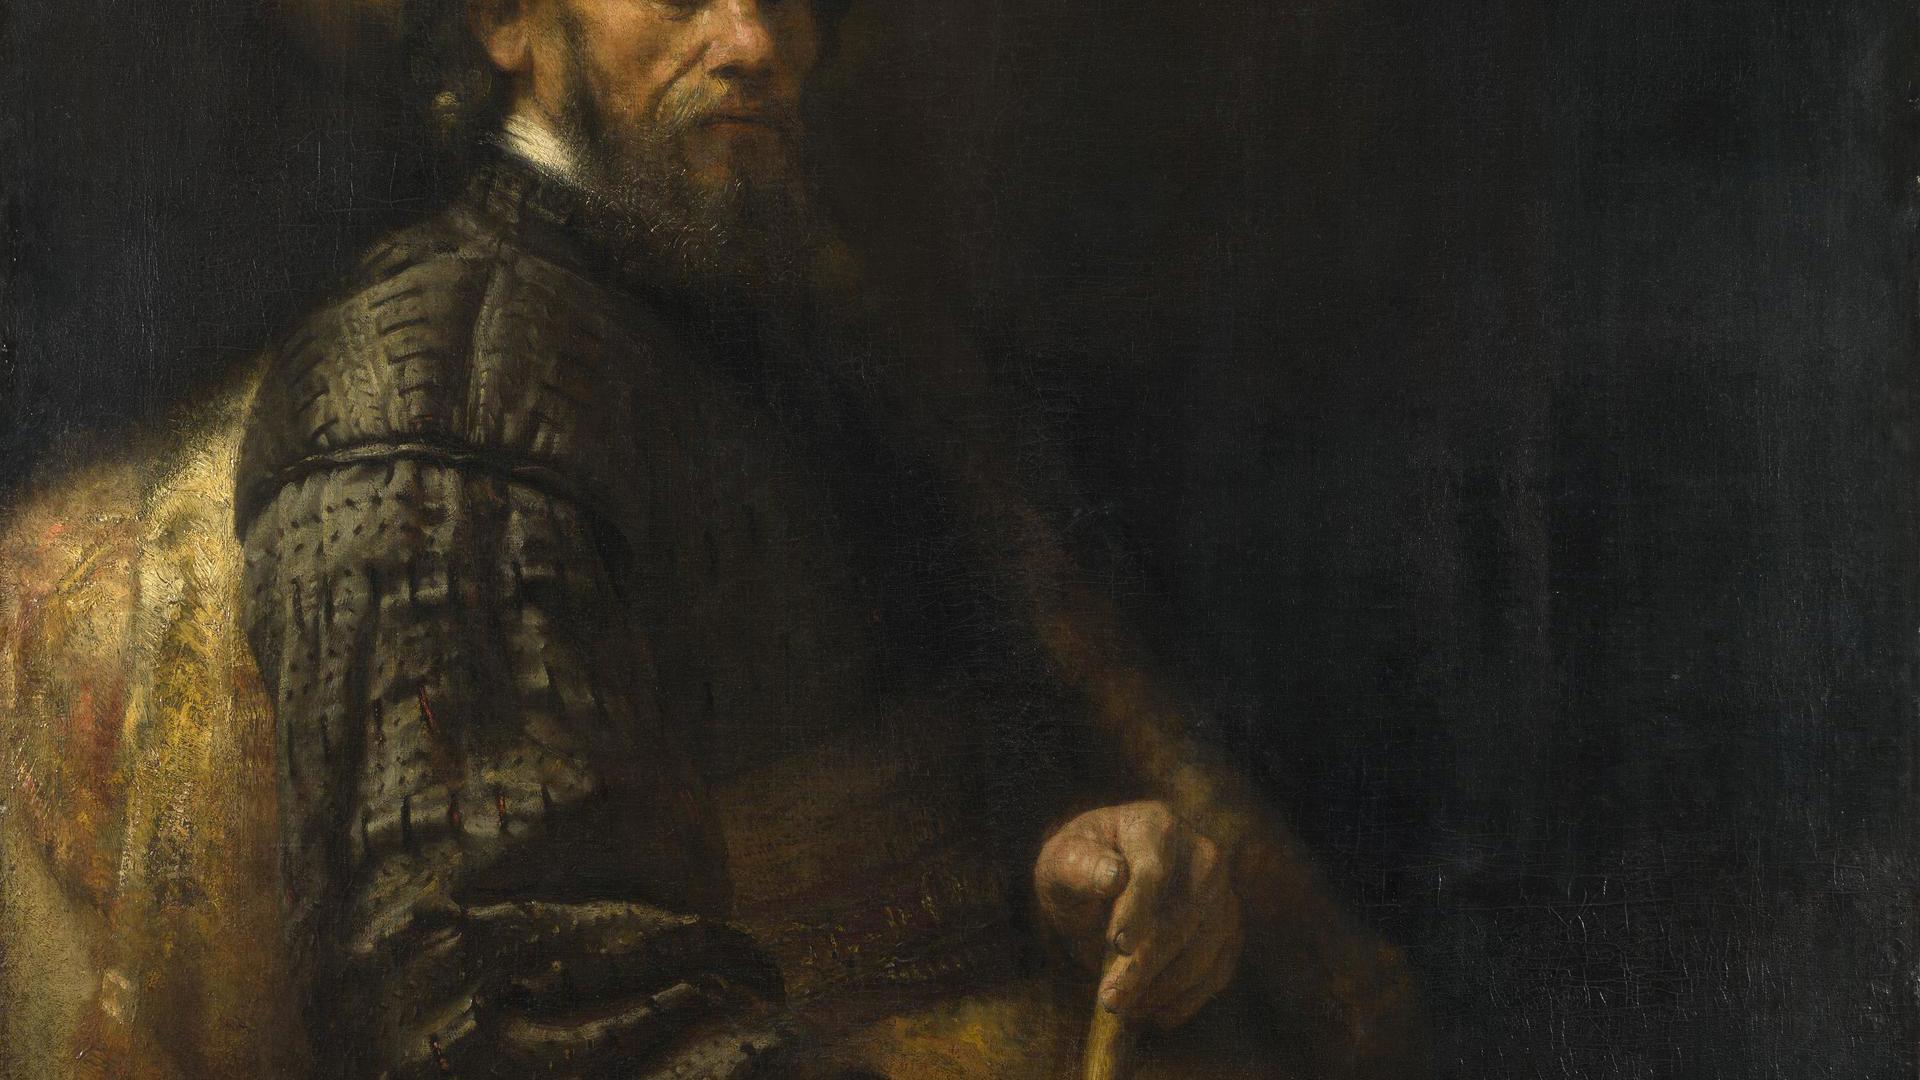 A Seated Man with a Stick by Follower of Rembrandt